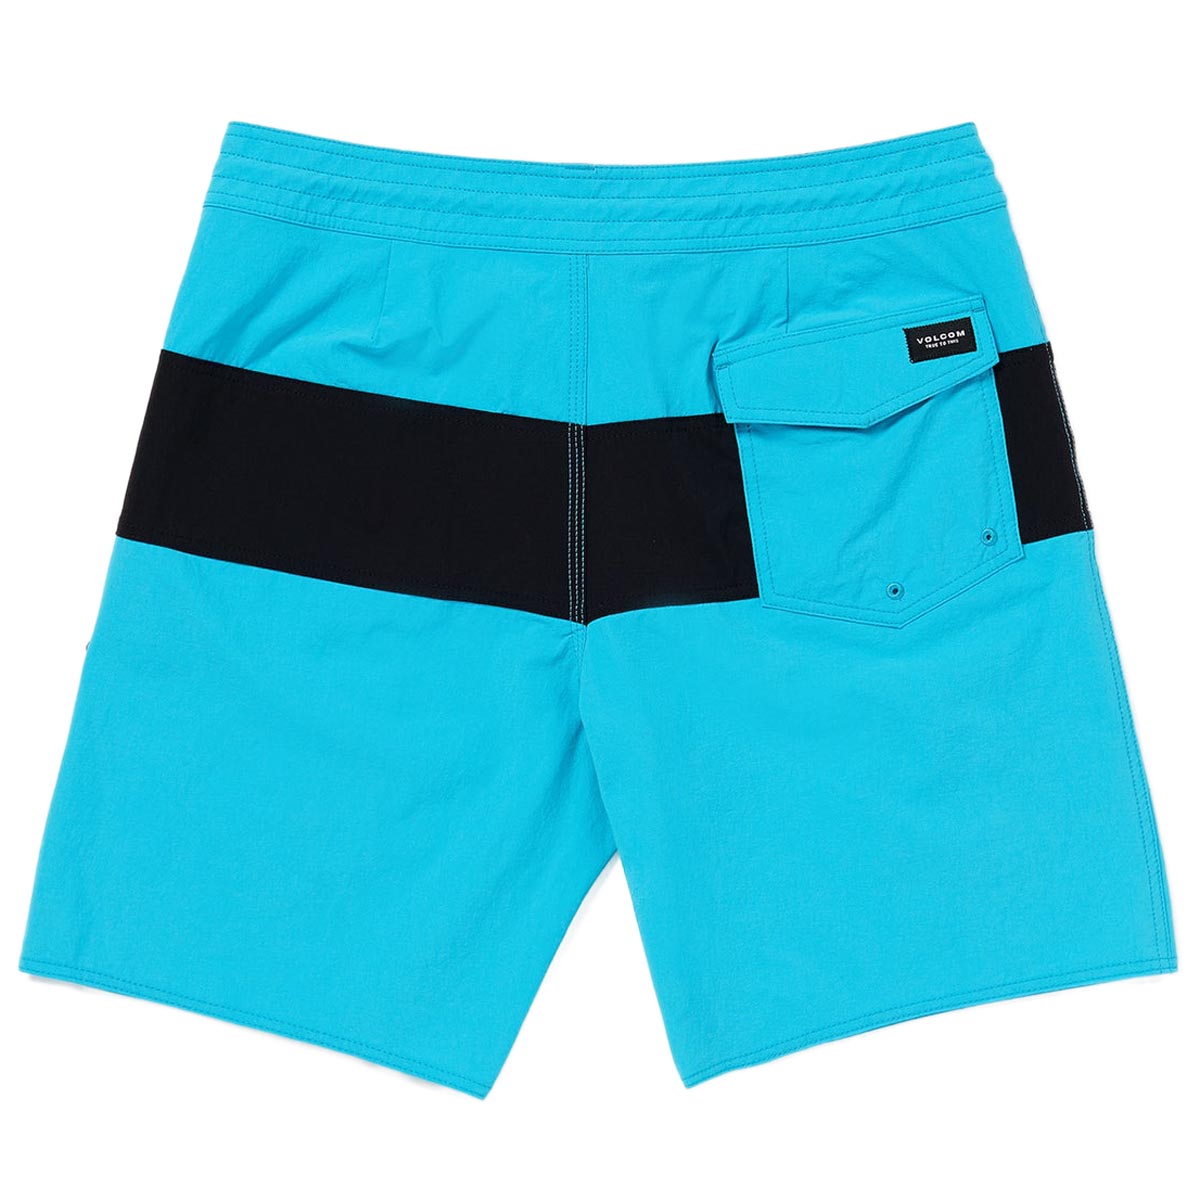 Volcom Vision Liberators 19 Board Shorts - Clearwater image 2